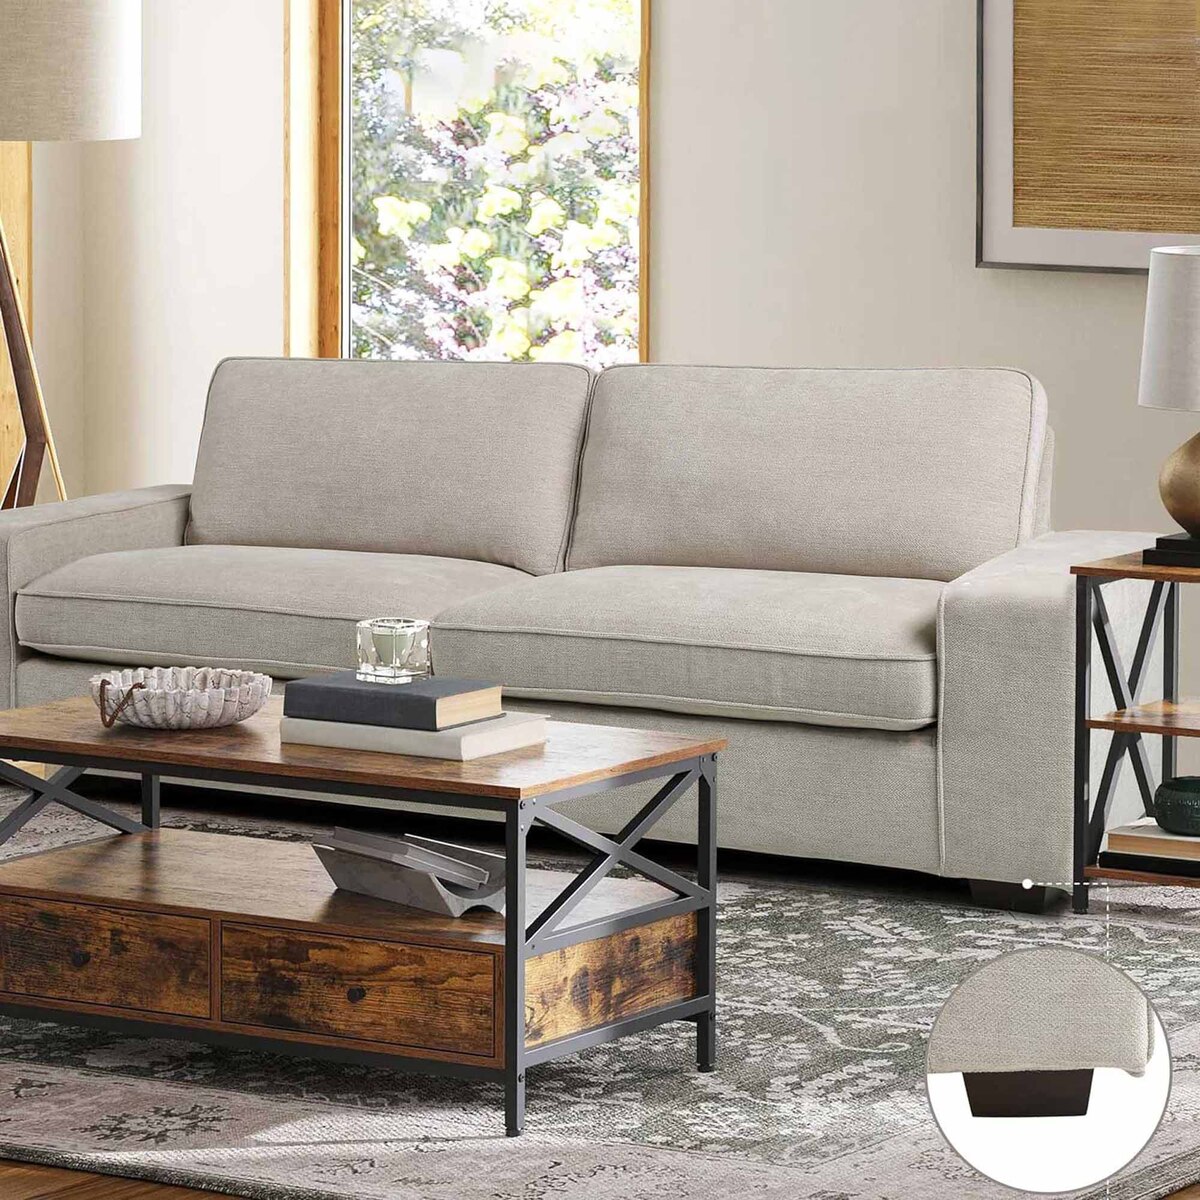 Timeless Grace, Beige 2-Seater Wide Armset Fabric Sofa, Solid woodframe, Comfy for Guest room, Living Room, Bedroom